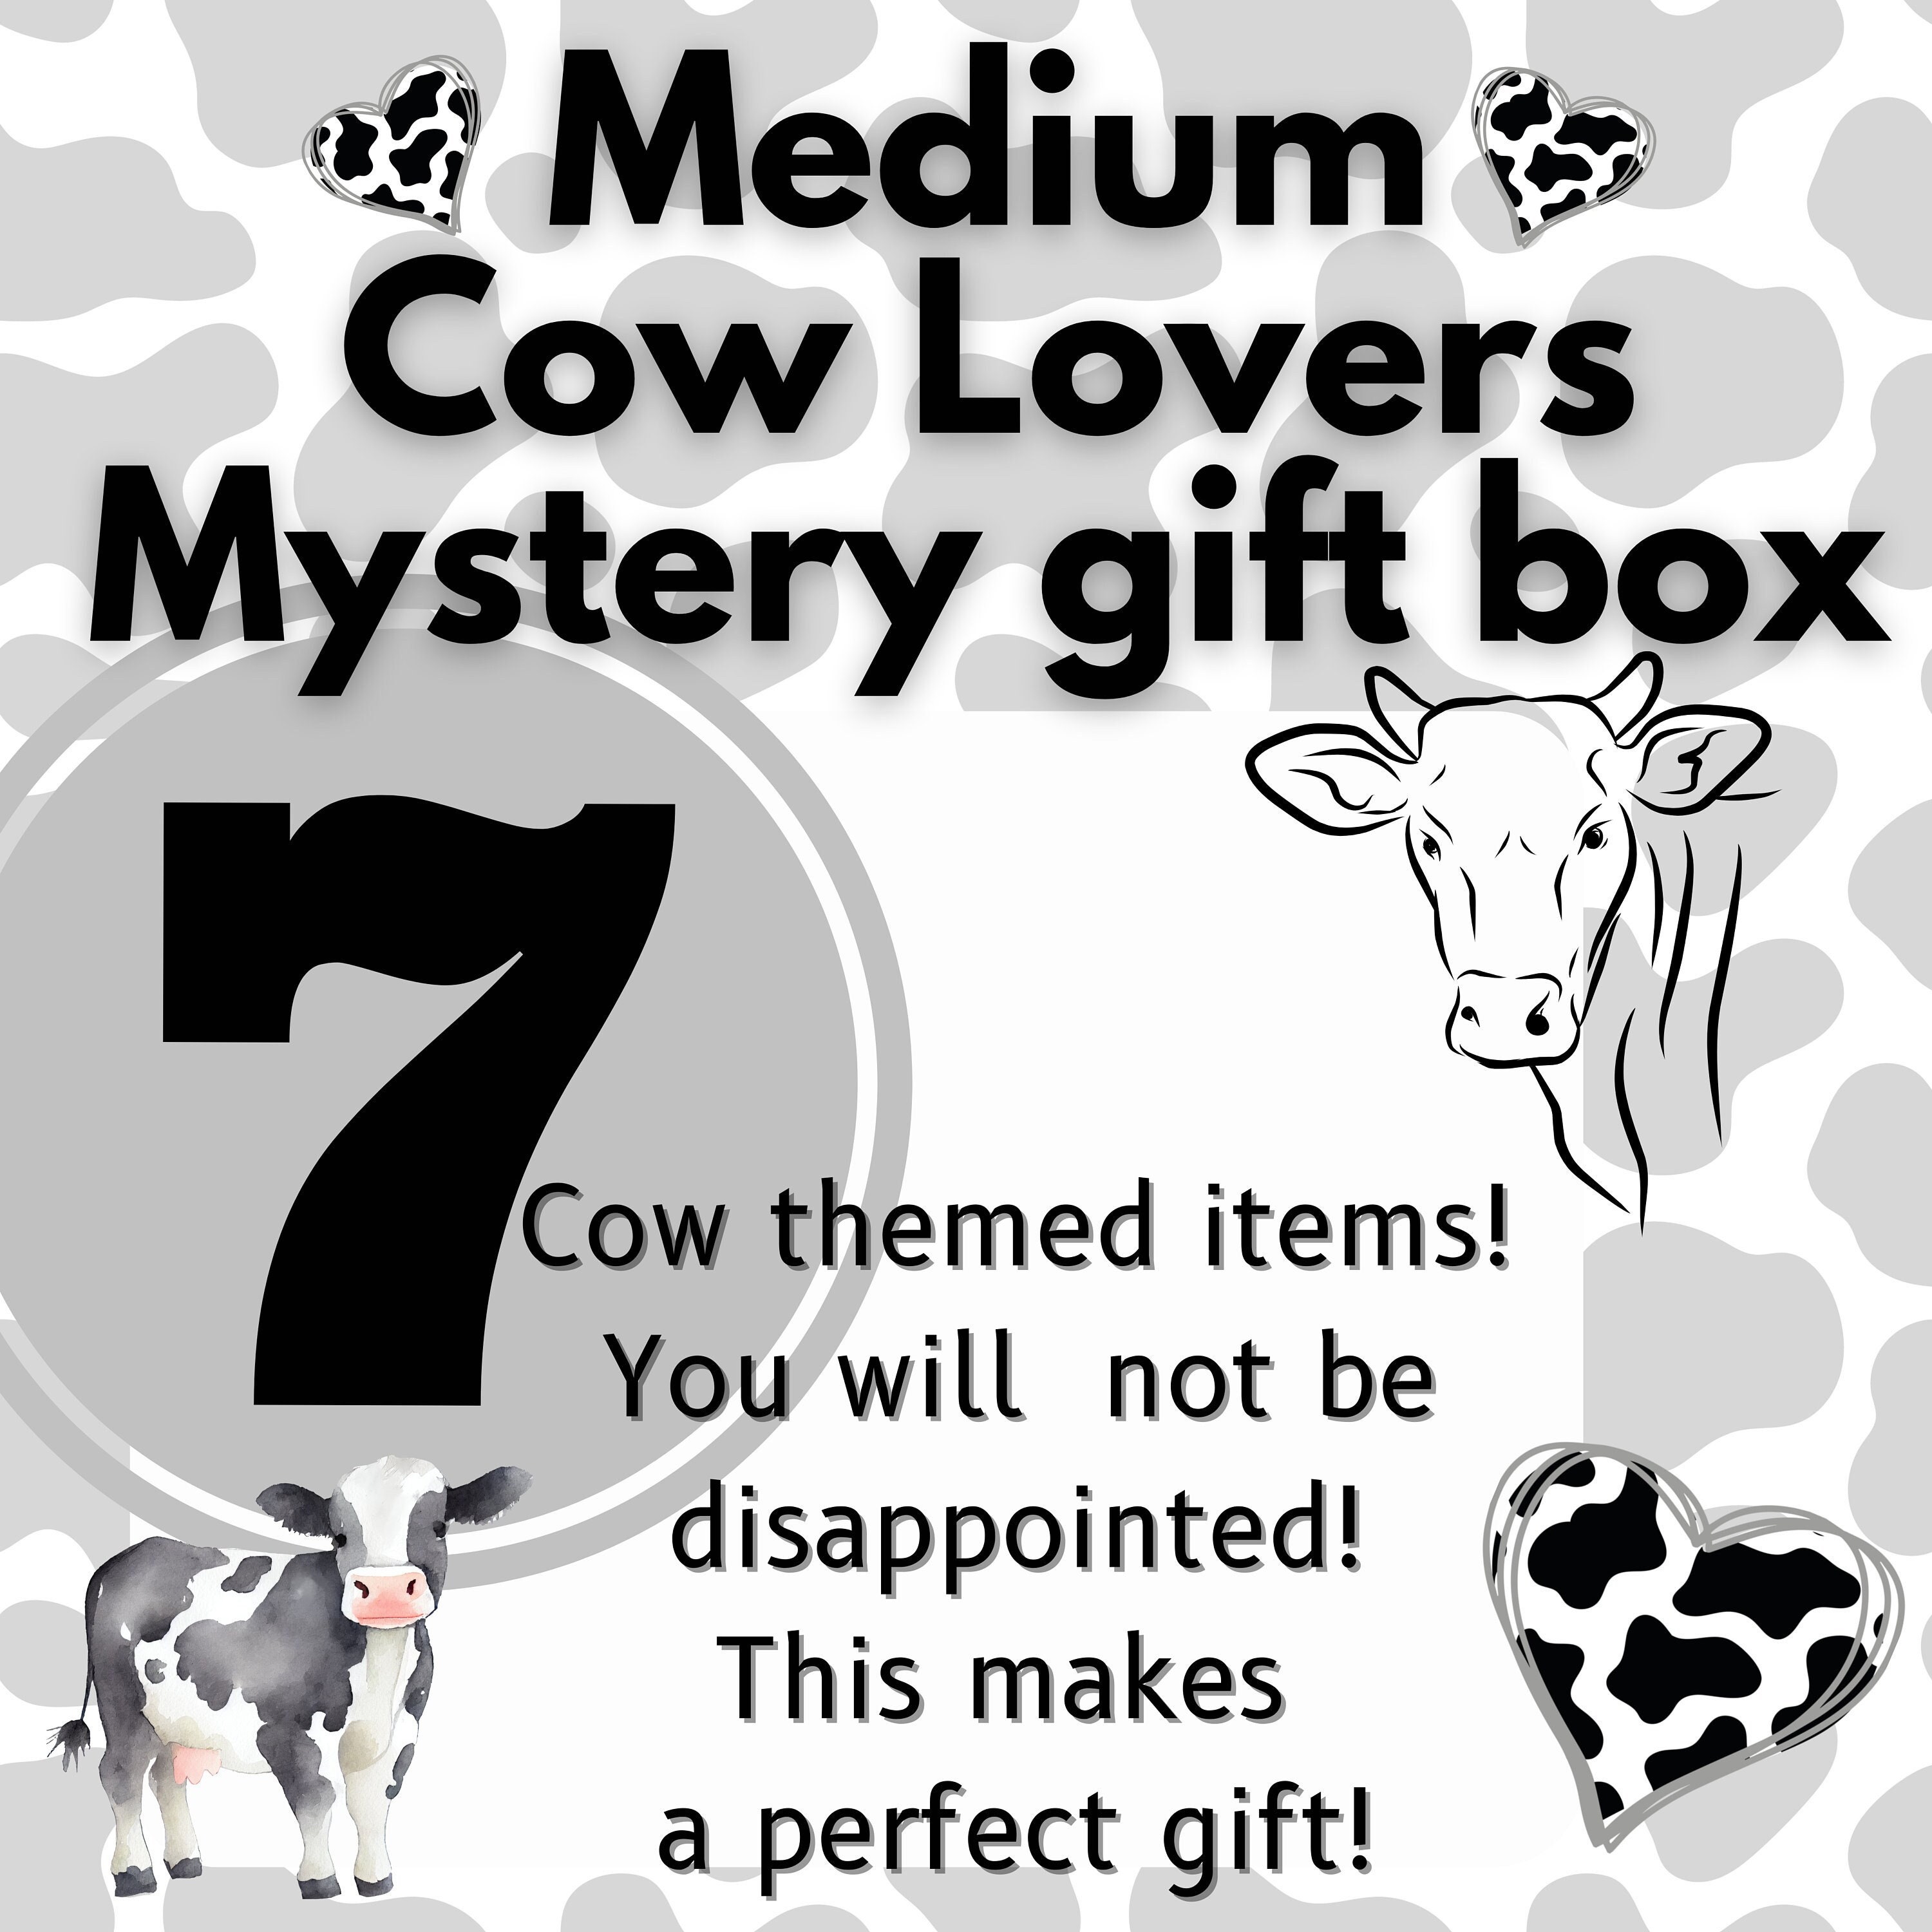 Cow themed Mystery Surprise Box with 7 items - Great Gift for a Cow Lover  Value of over 50 dollars each